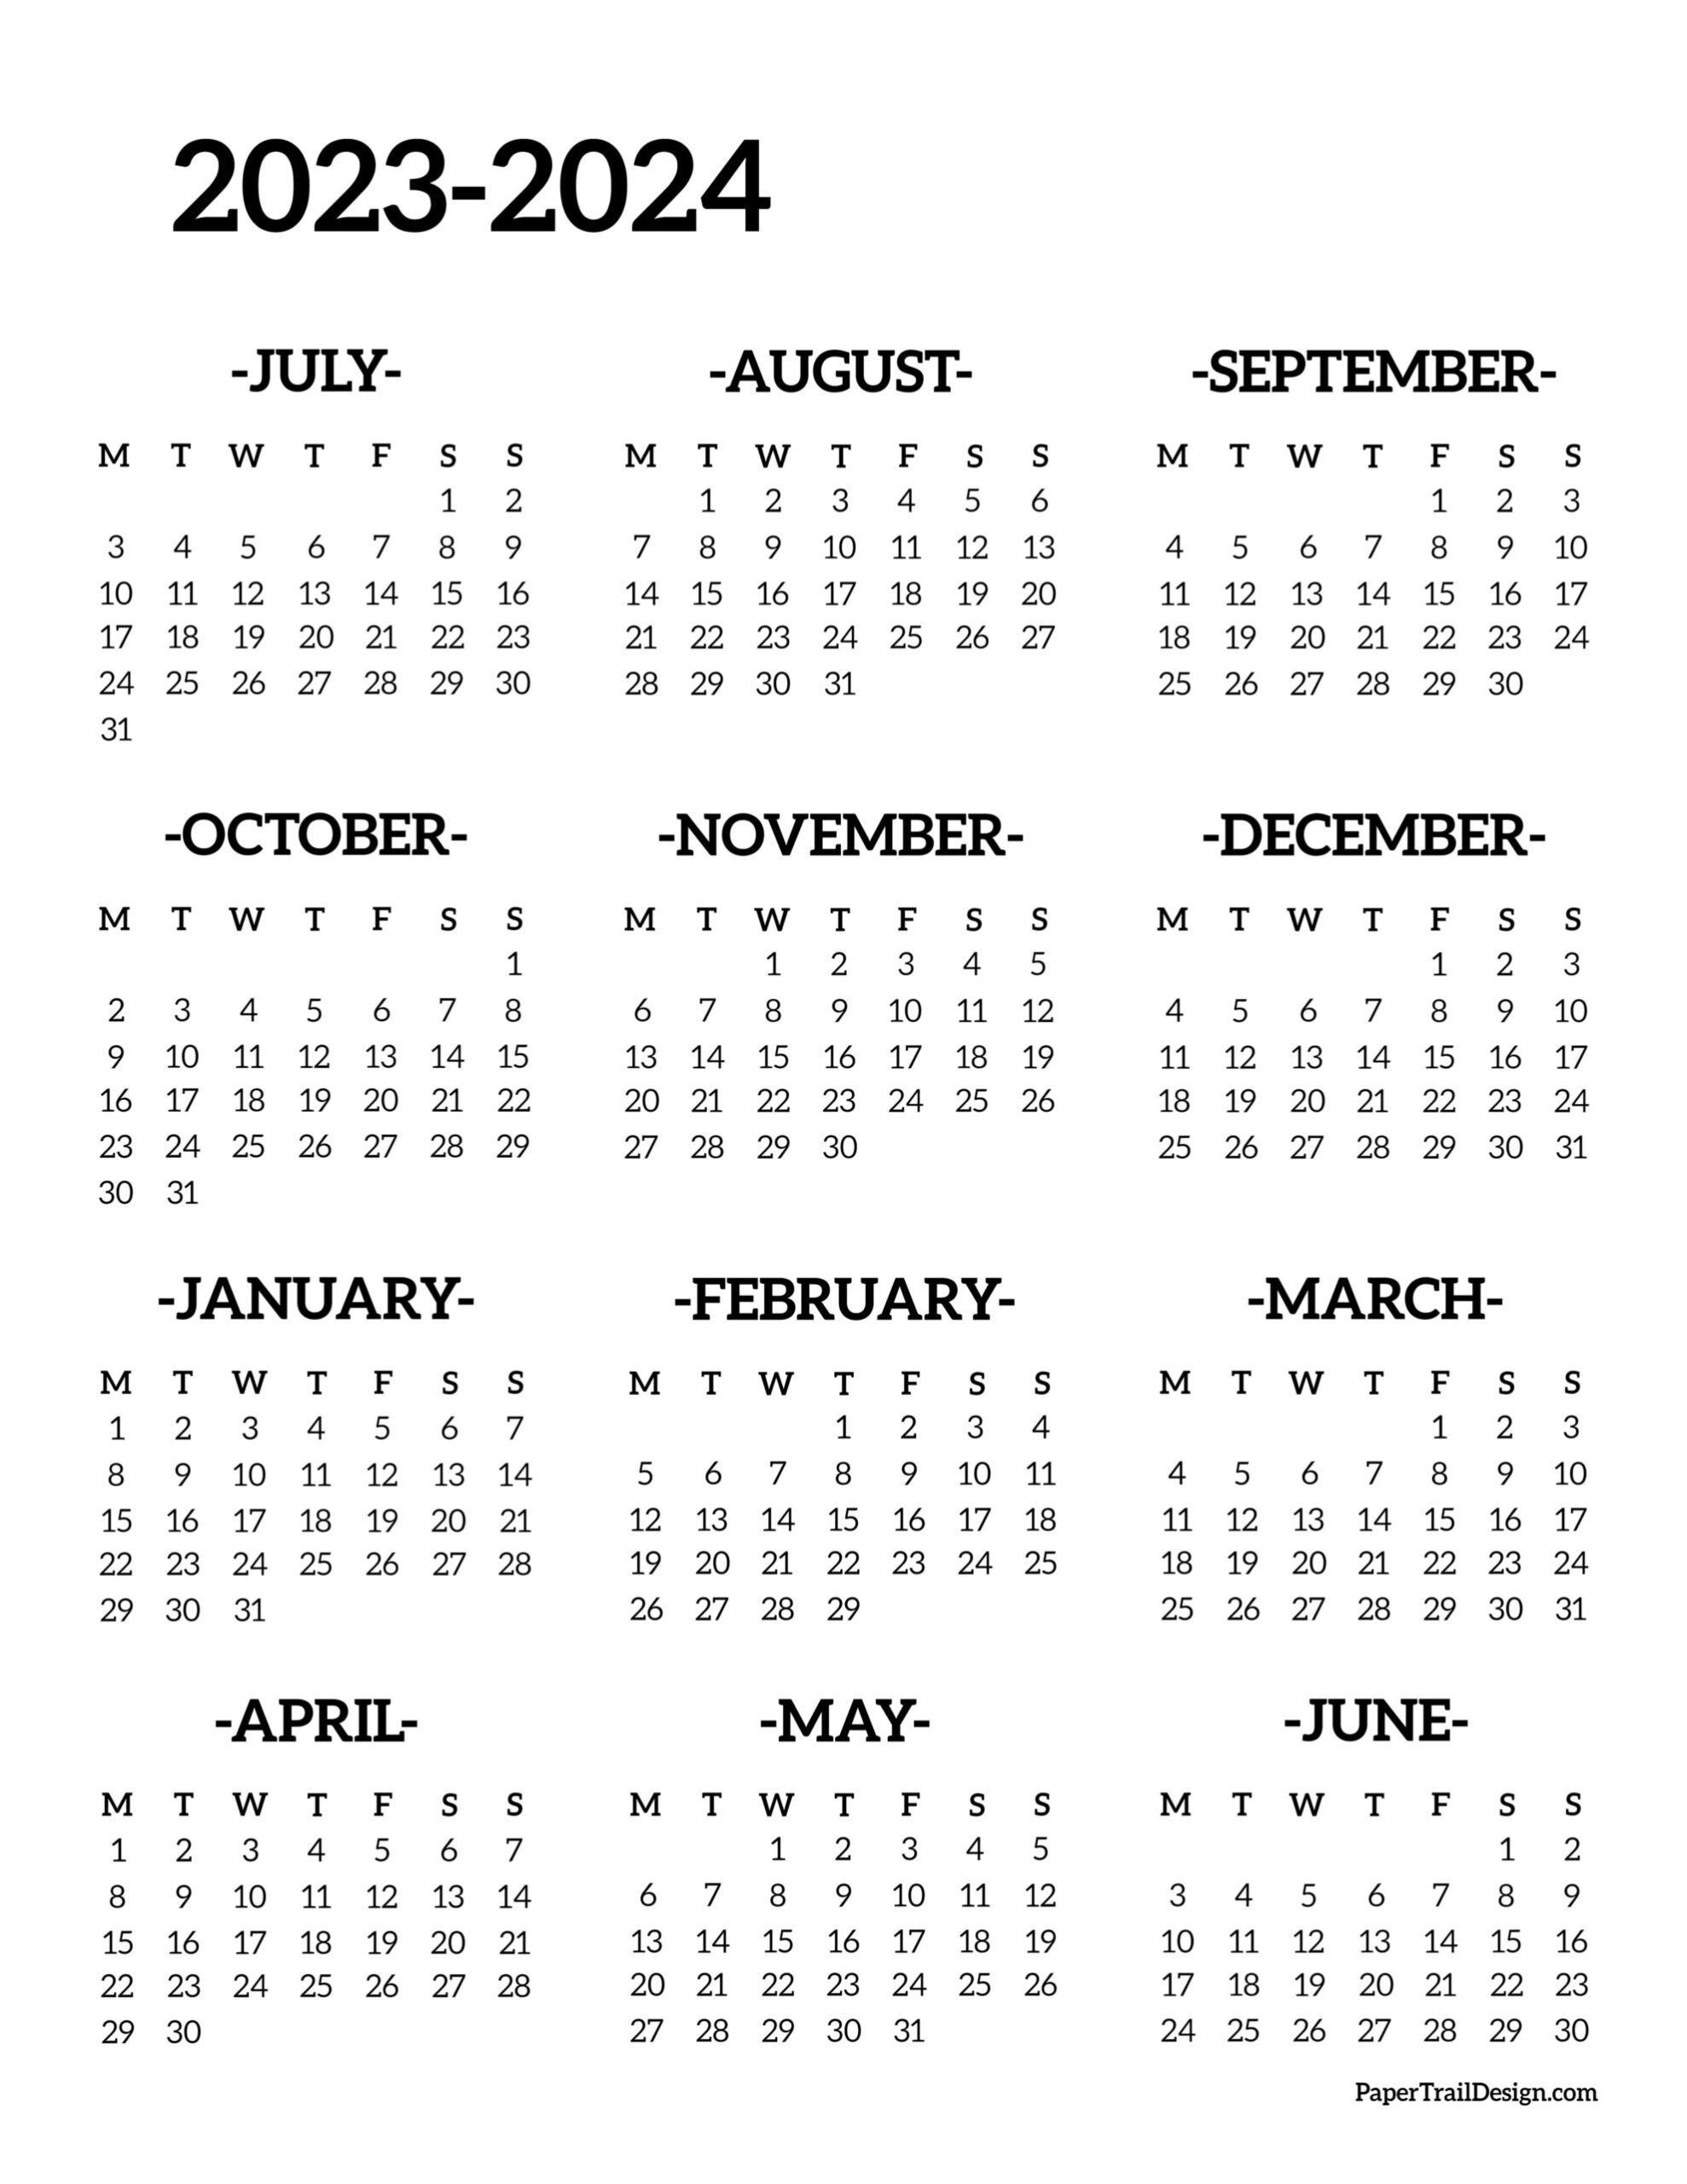 2023-2024 School Year Calendar Free Printable - Paper Trail Design within Printable Calendar June 2023 To May 2024